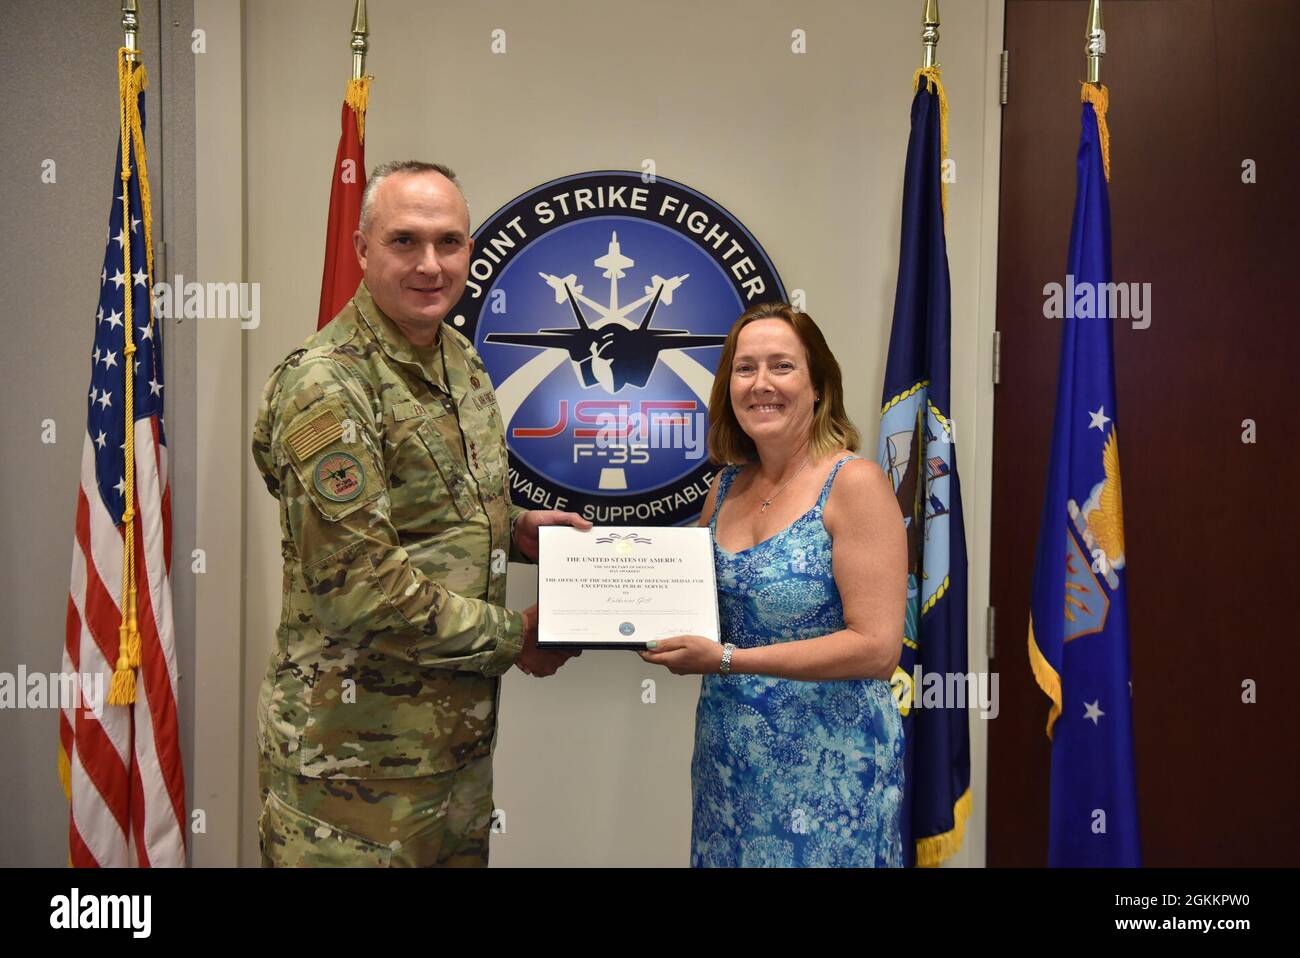 Lt. Gen. Eric Fick, F-35 Joint Program Executive Officer, presents Katherine Gill, F-35 Software Sustainment Team Lead, with the Office of the Secretary of Defense Medal for Exceptional Public Service certificate during a semi-virtual all hands ceremony at the program headquarters in Arlington, Va. The F-35 Joint Program Office is the Department of Defense's focal point for the 5th generation strike aircraft for the Navy, Air Force, Marines, and our allies. The F-35 is the premier multi-mission, 5th generation weapon system. Its ability to collect, analyze and share data is a force multiplier Stock Photo